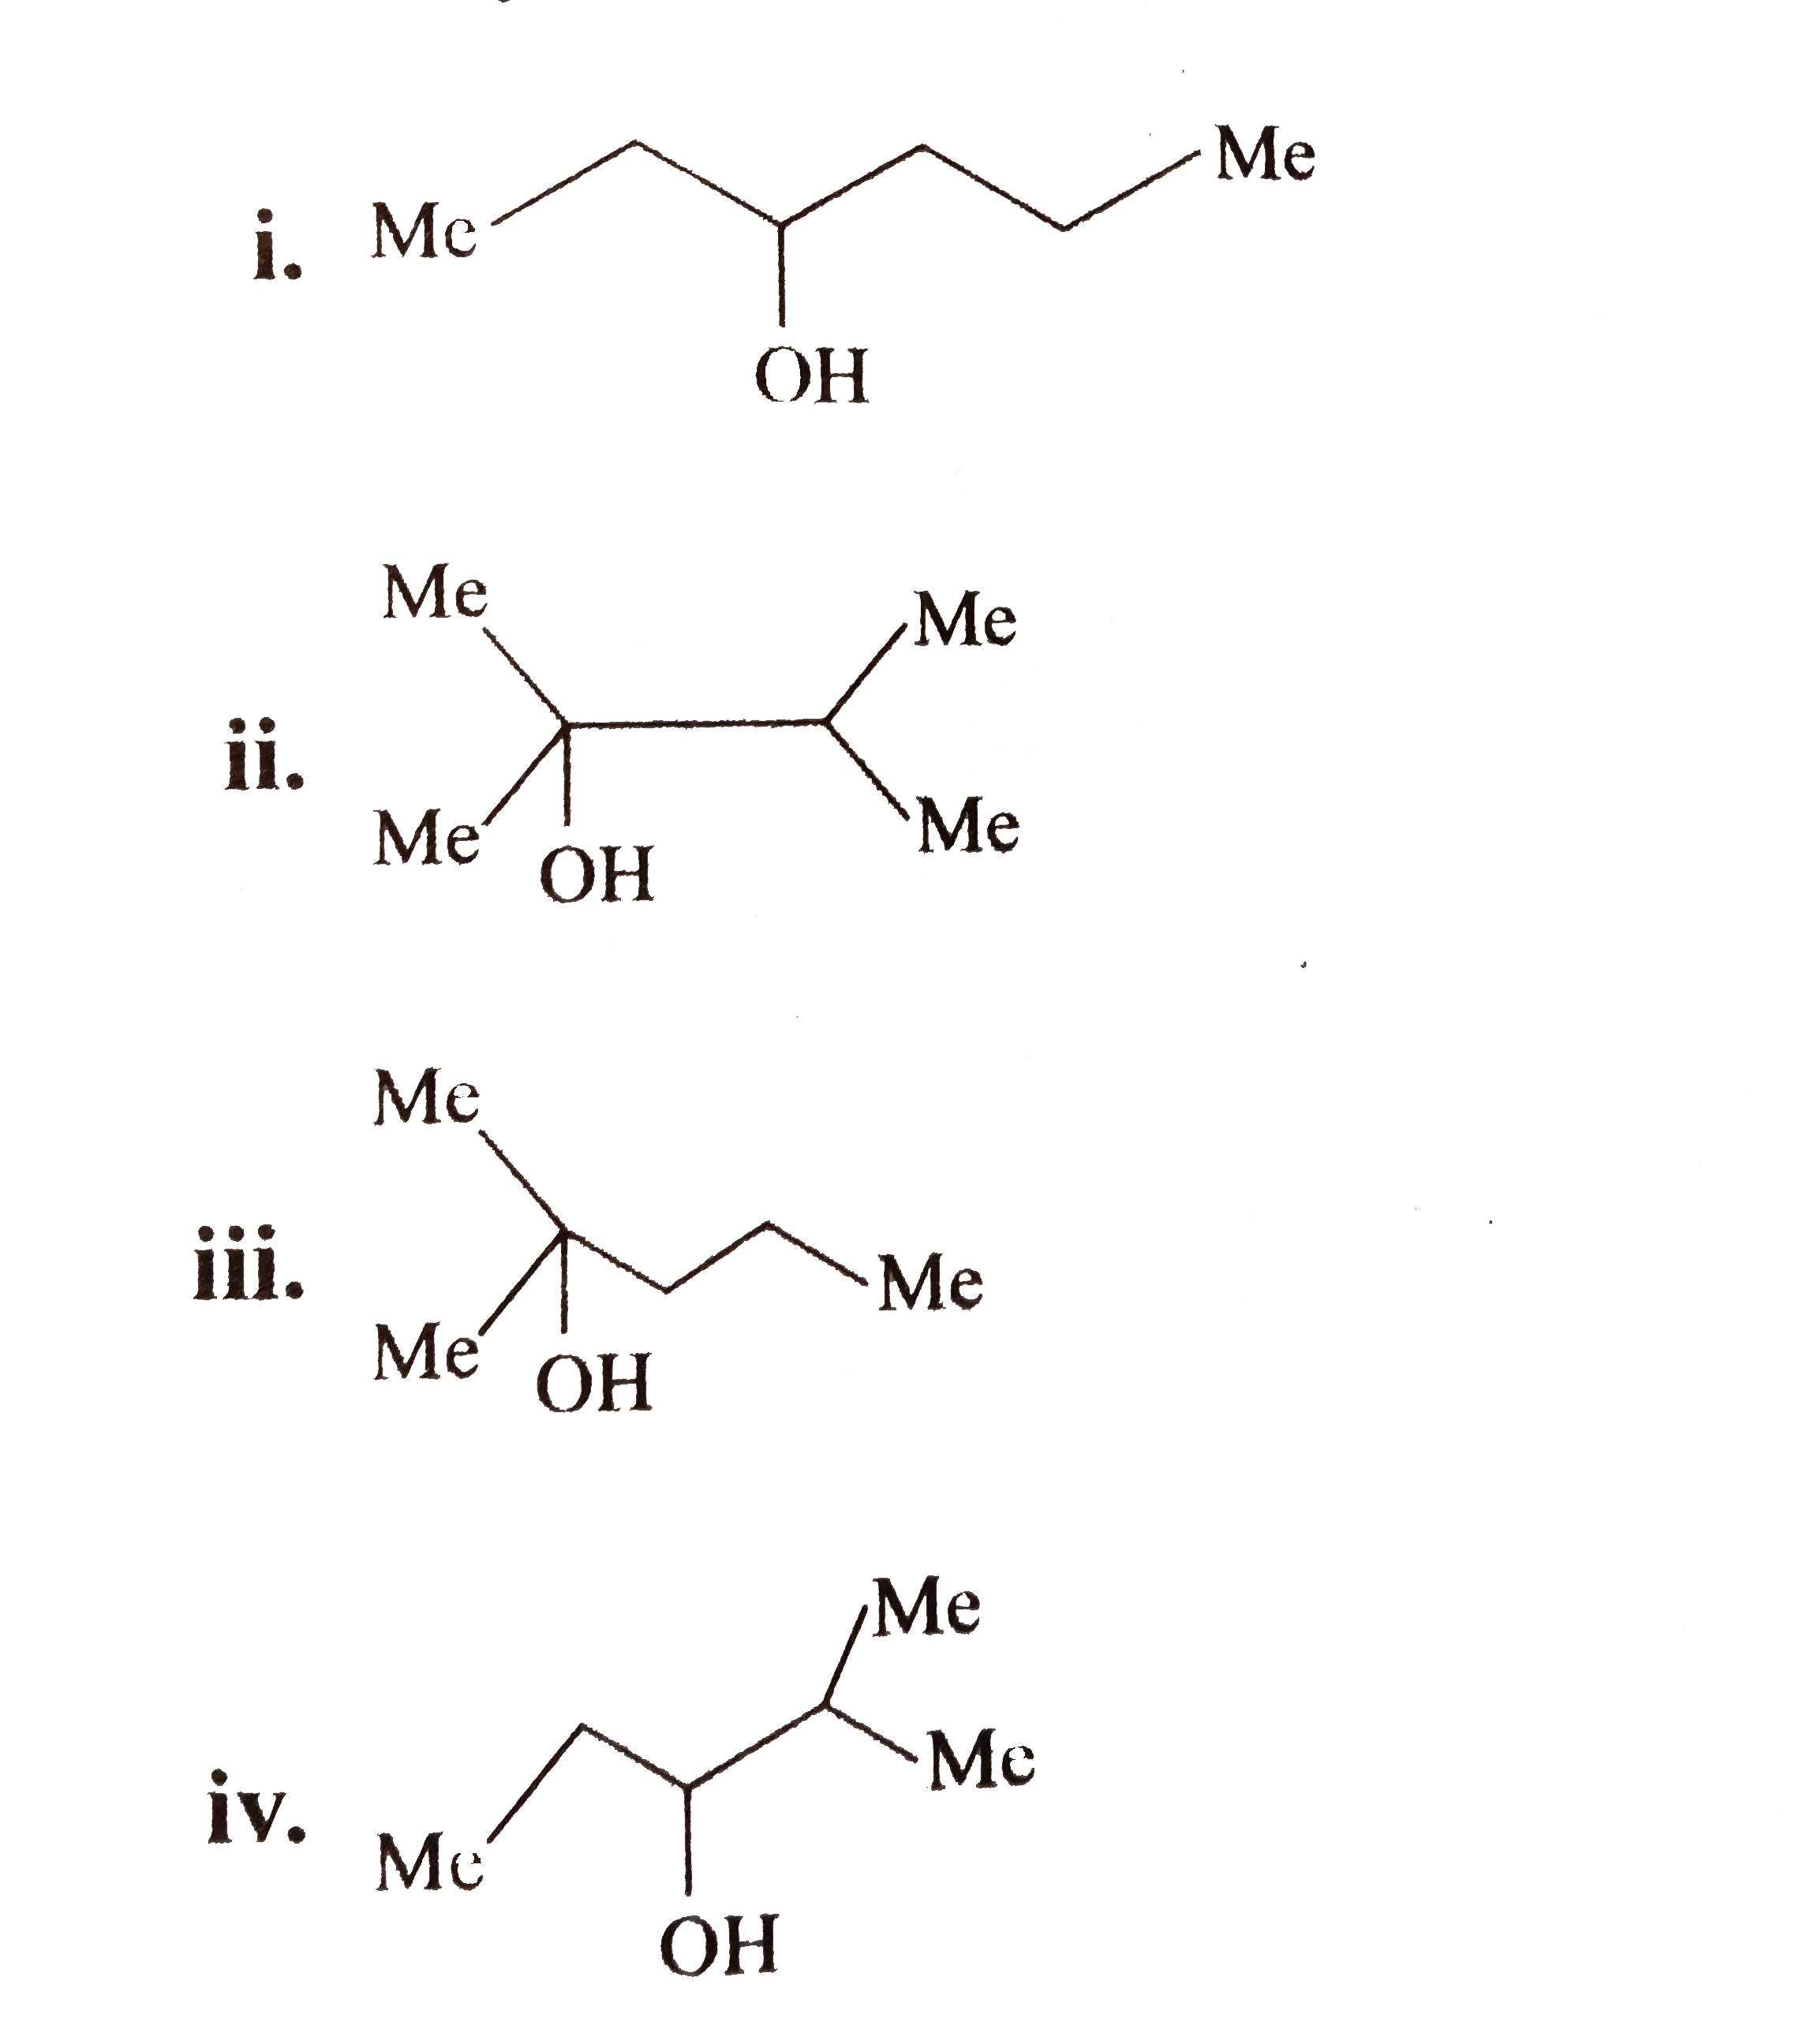 Arrange the following alcohols in the decreasing order of dehydration with conc. H(2)SO(4).